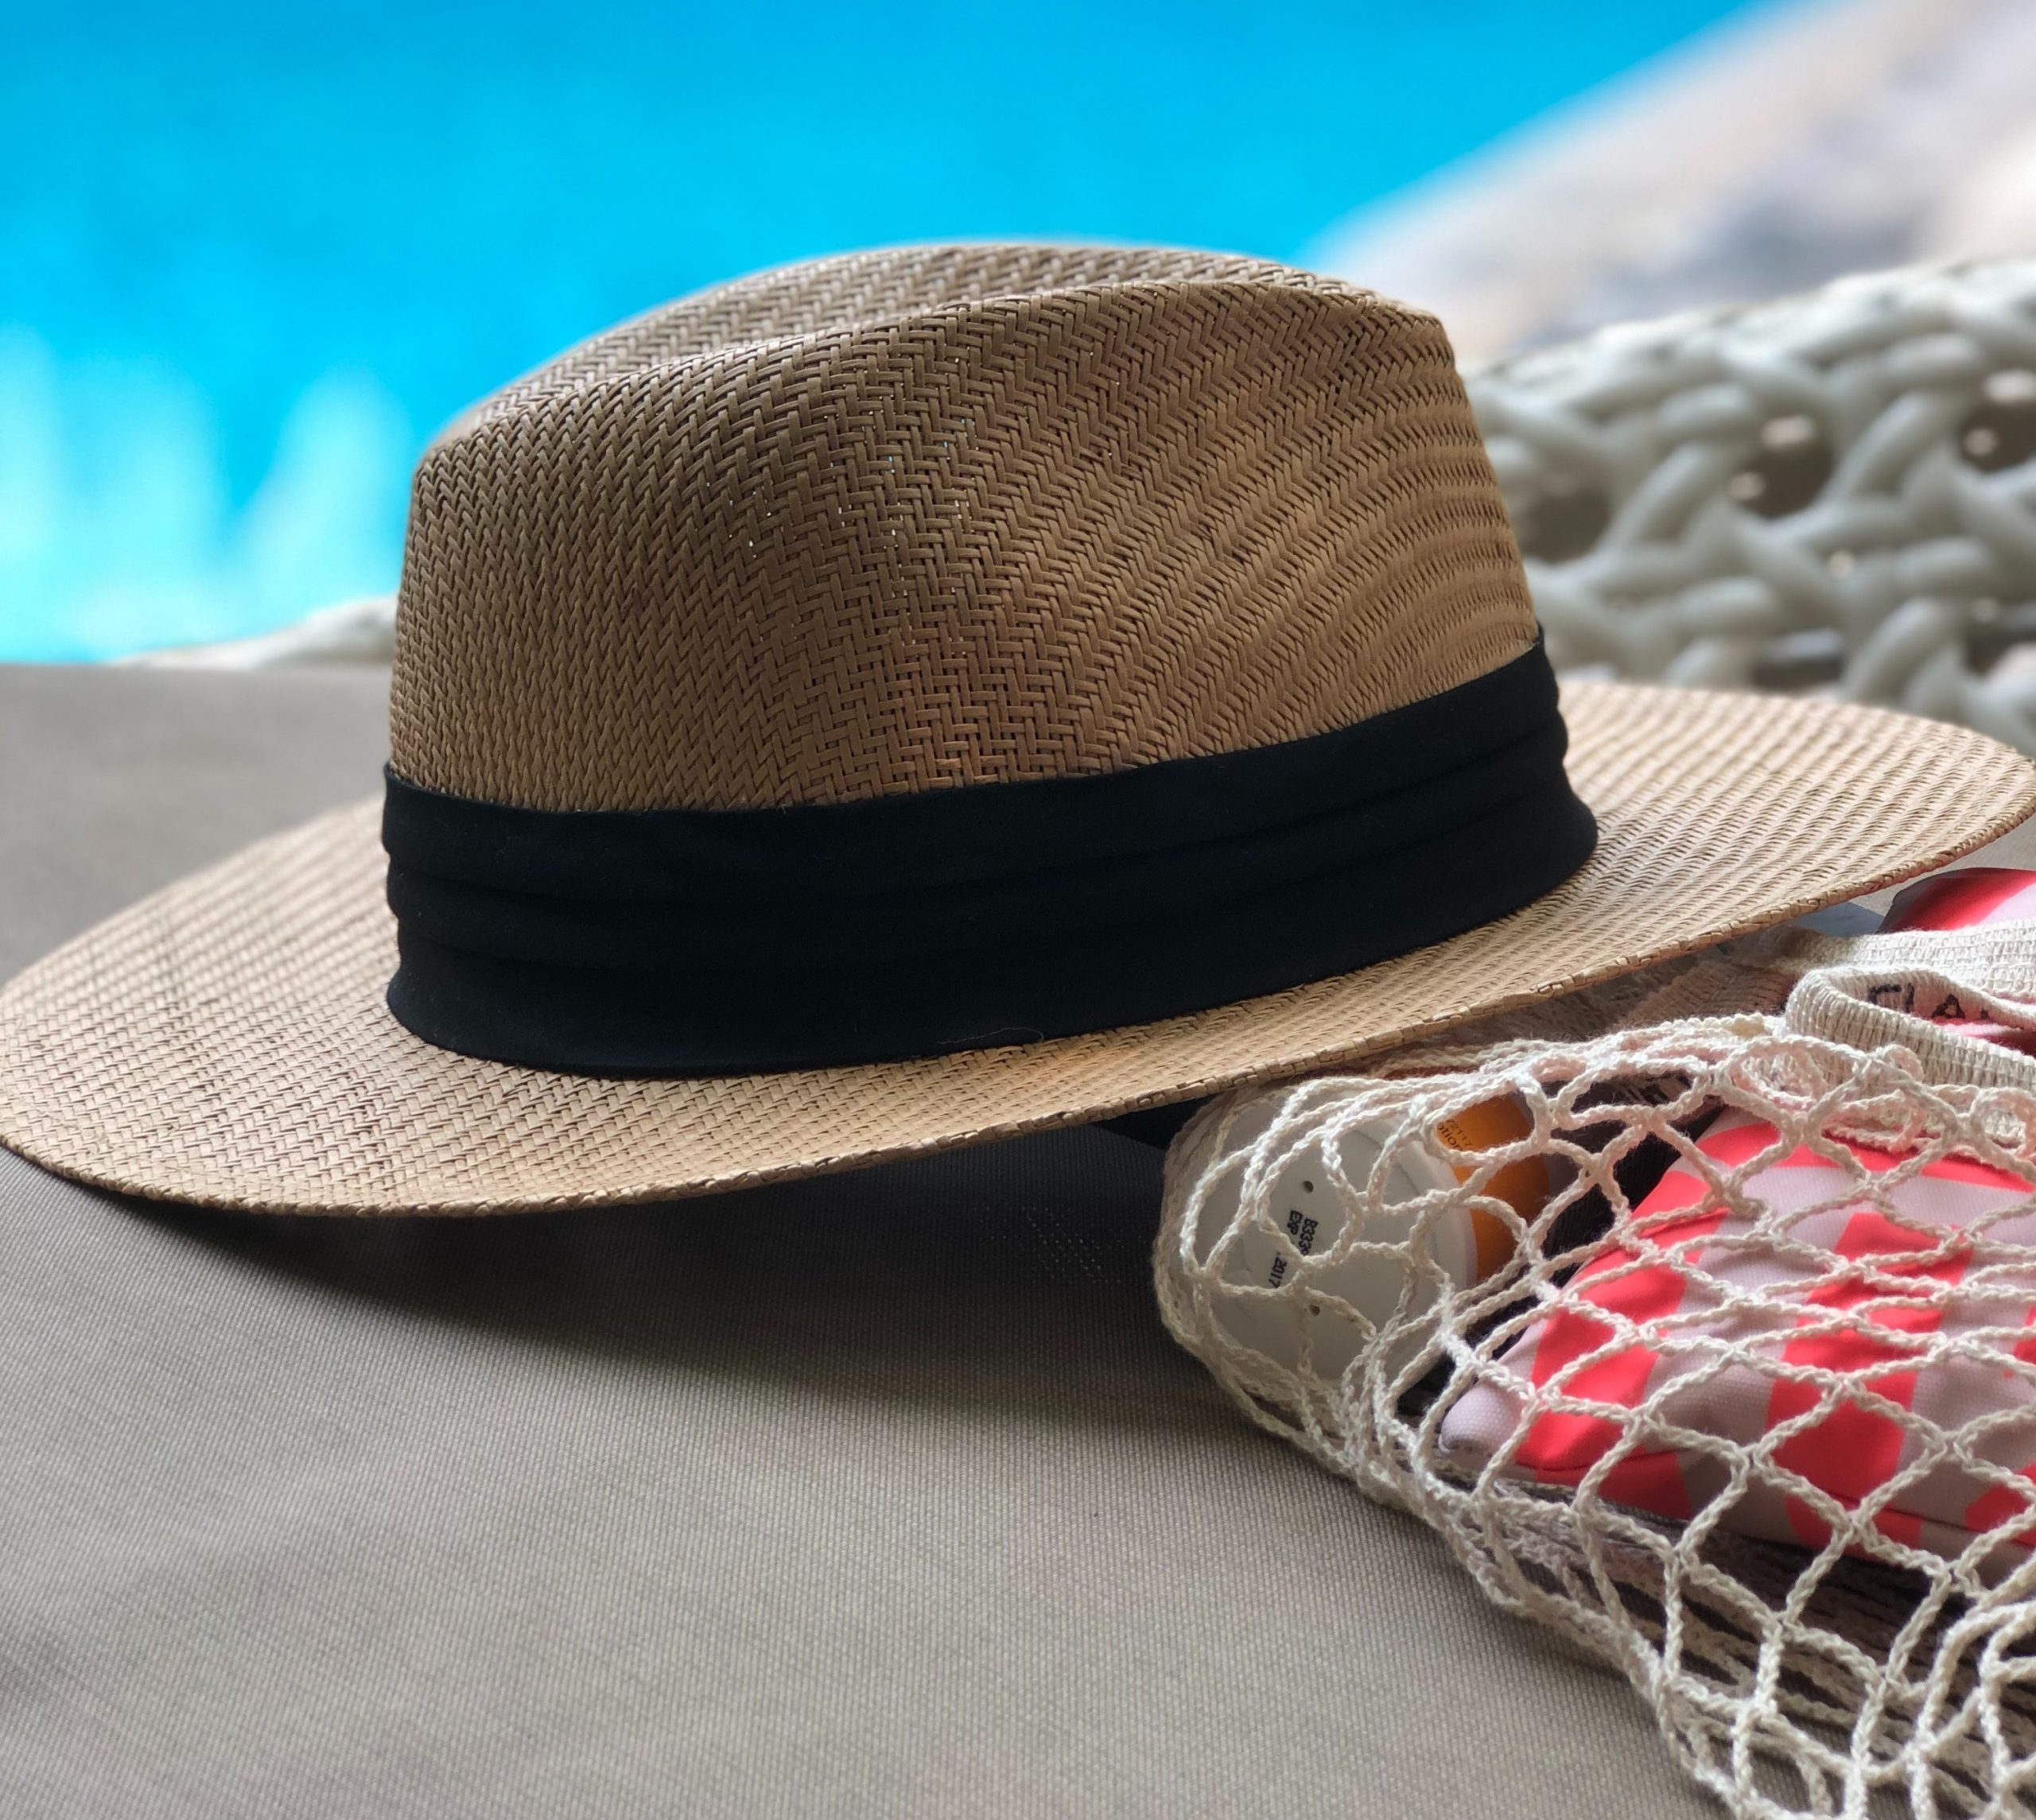 Stylish and practical headwear you need to pack for your family vacation